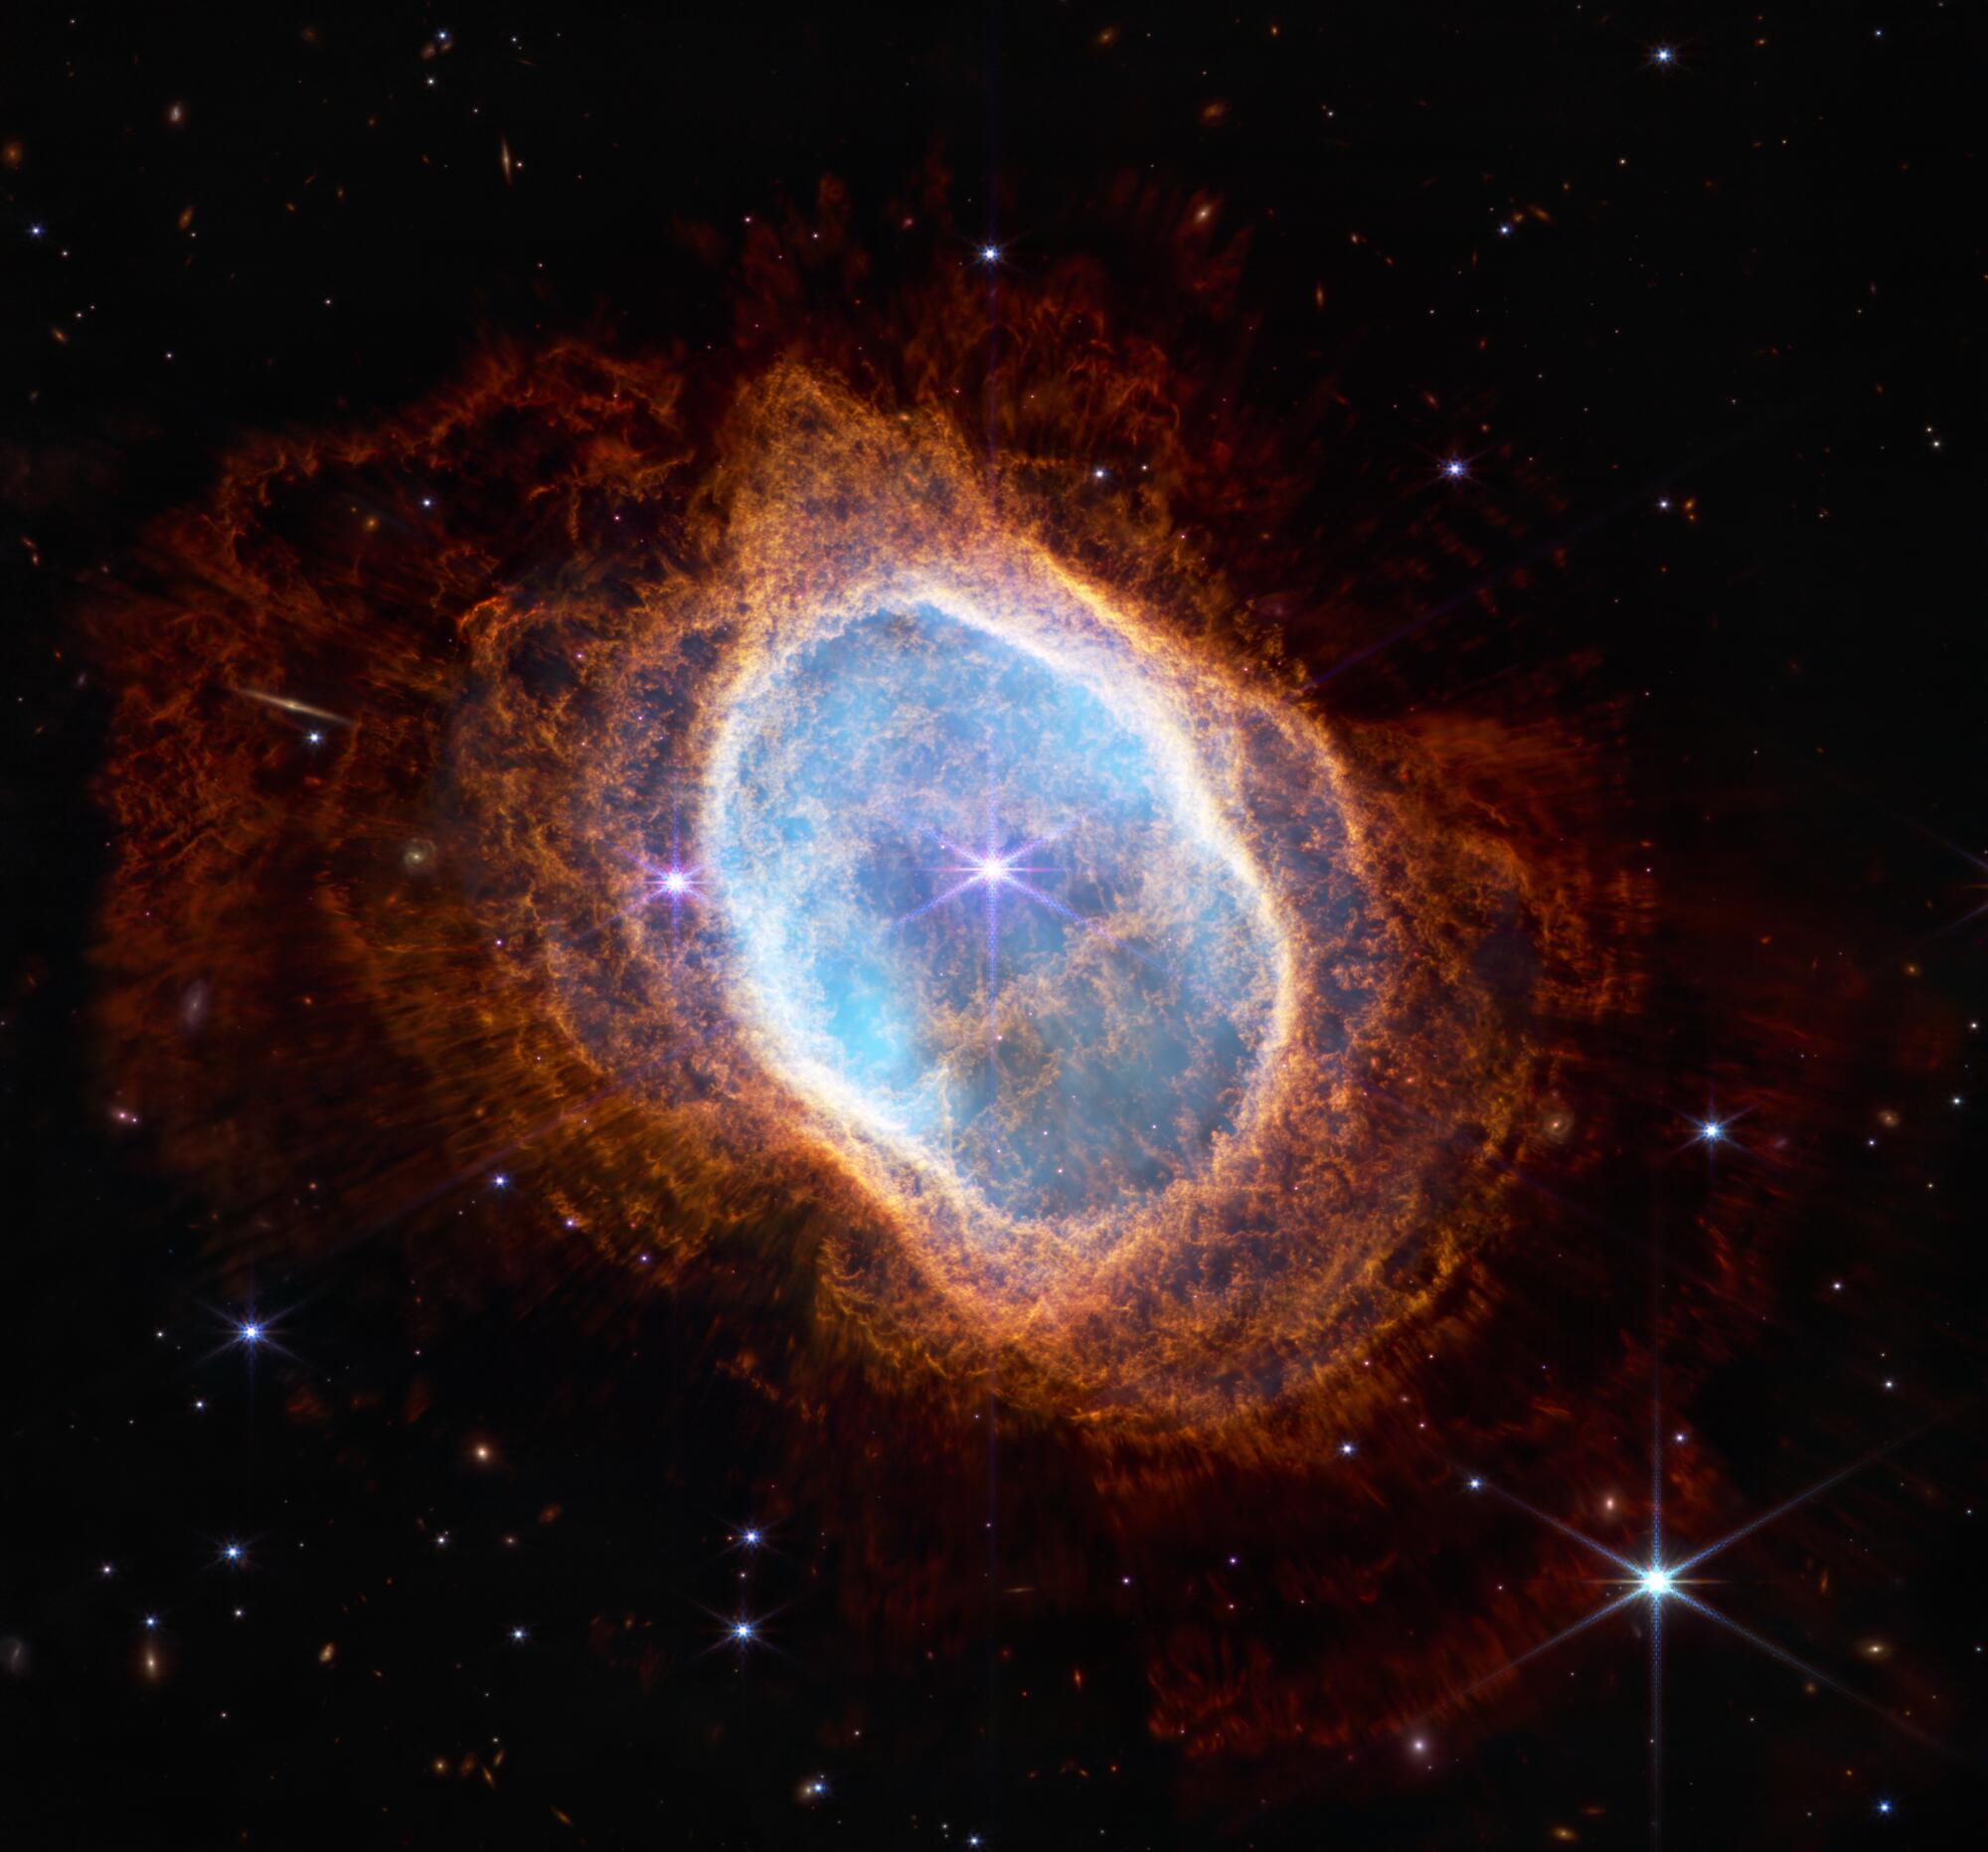 The bright star at the center of NGC 3132, while prominent when viewed by NASA's Webb Telescope 